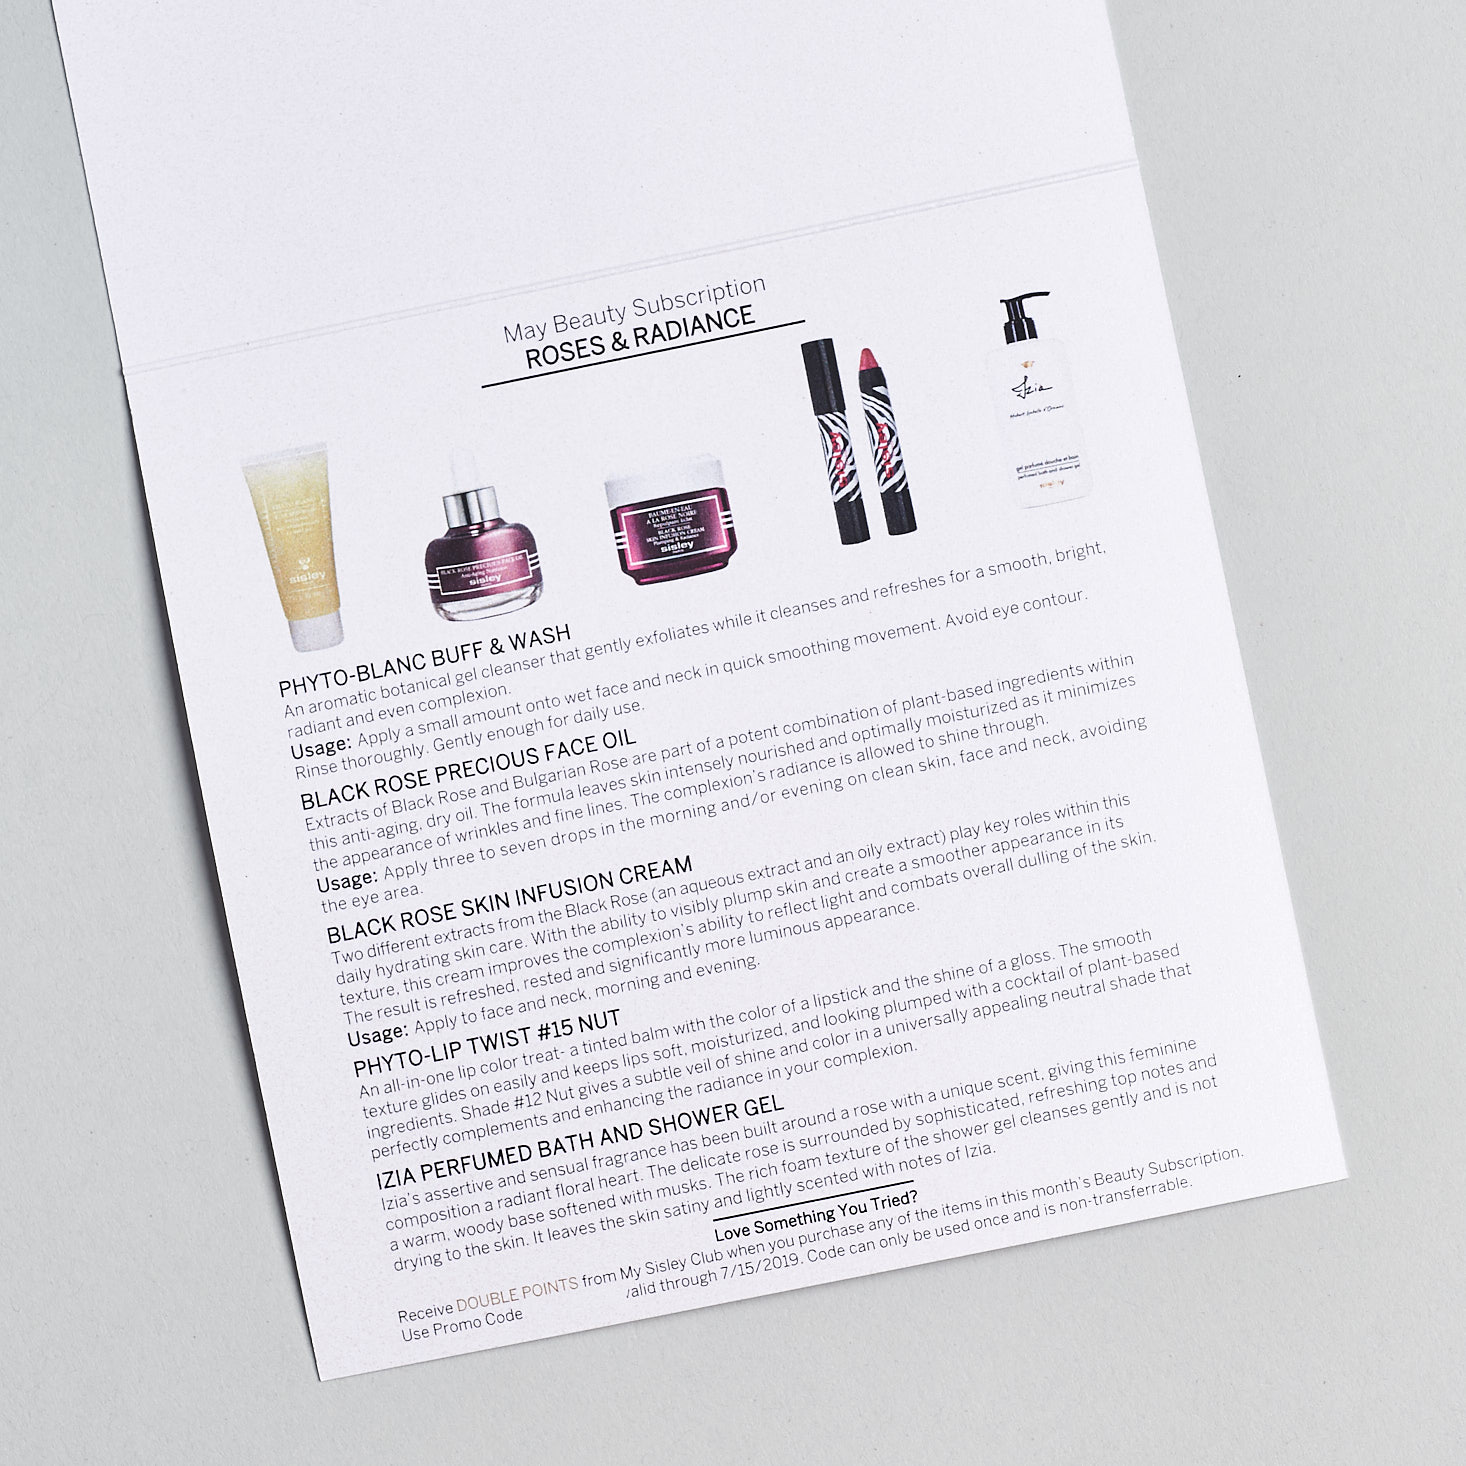 Sisley June 2019 Review product info